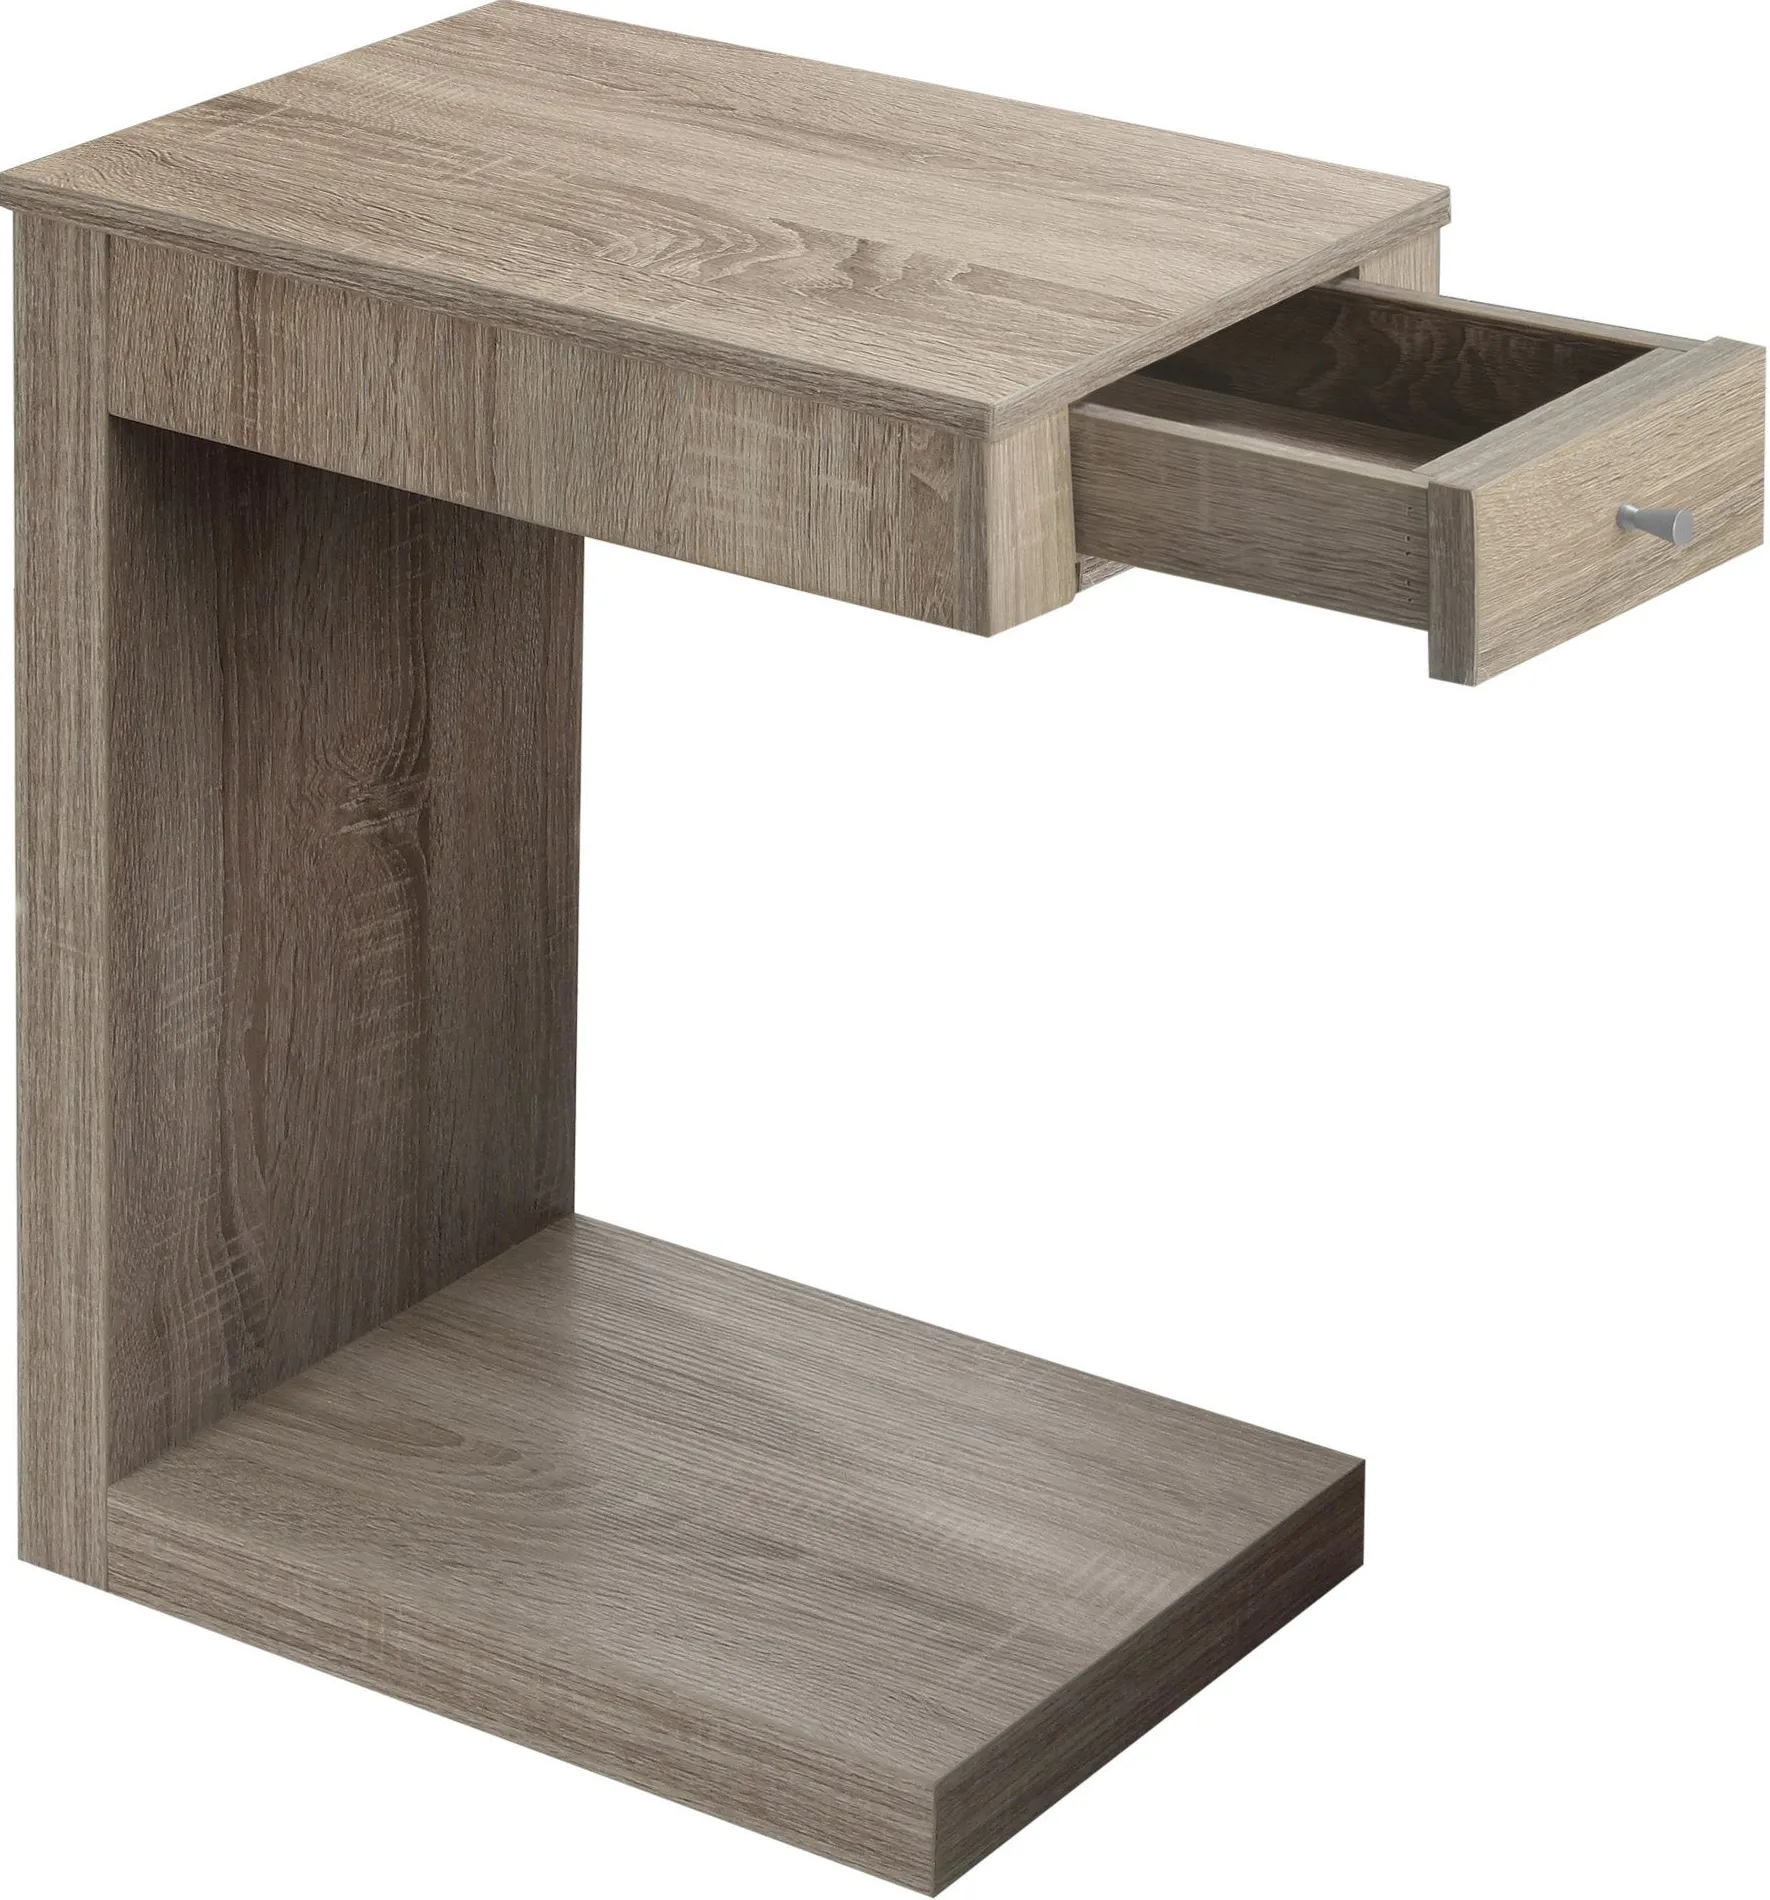 Accent Table, C-Shaped, End, Side, Snack, Storage Drawer, Living Room, Bedroom, Laminate, Brown, Contemporary, Modern